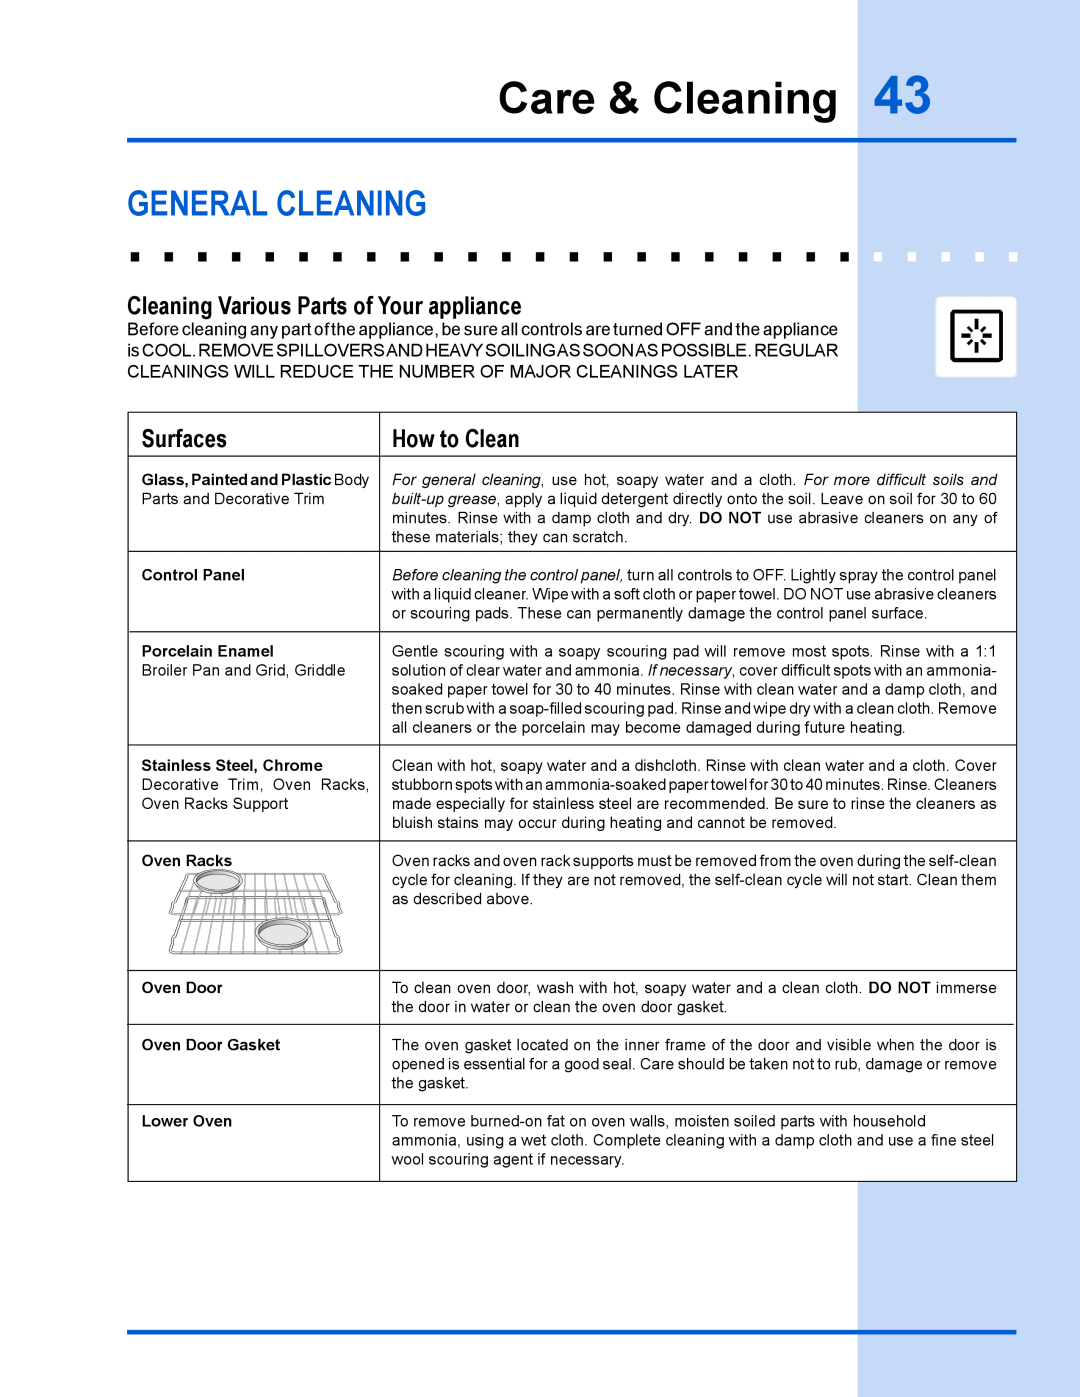 Electrolux EW30GS65GS general cleaning, Cleaning Various Parts of Your appliance, Surfaces, How to Clean, Care & Cleaning 